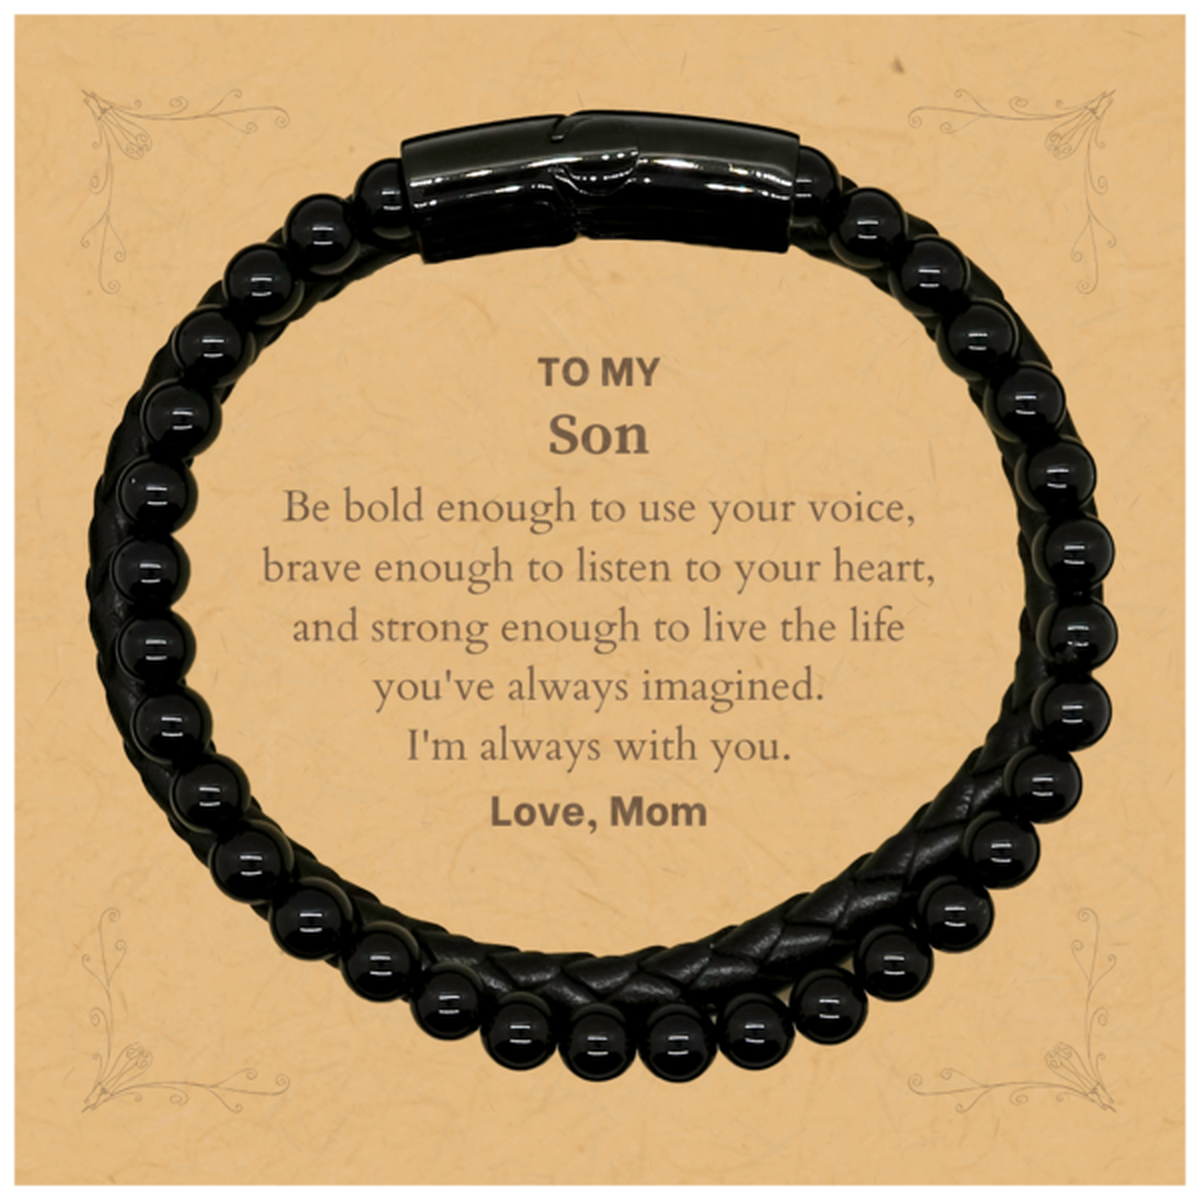 Keepsake Son Stone Leather Bracelets Gift Idea Graduation Christmas Birthday Son from Mom, Son Be bold enough to use your voice, brave enough to listen to your heart. Love, Mom